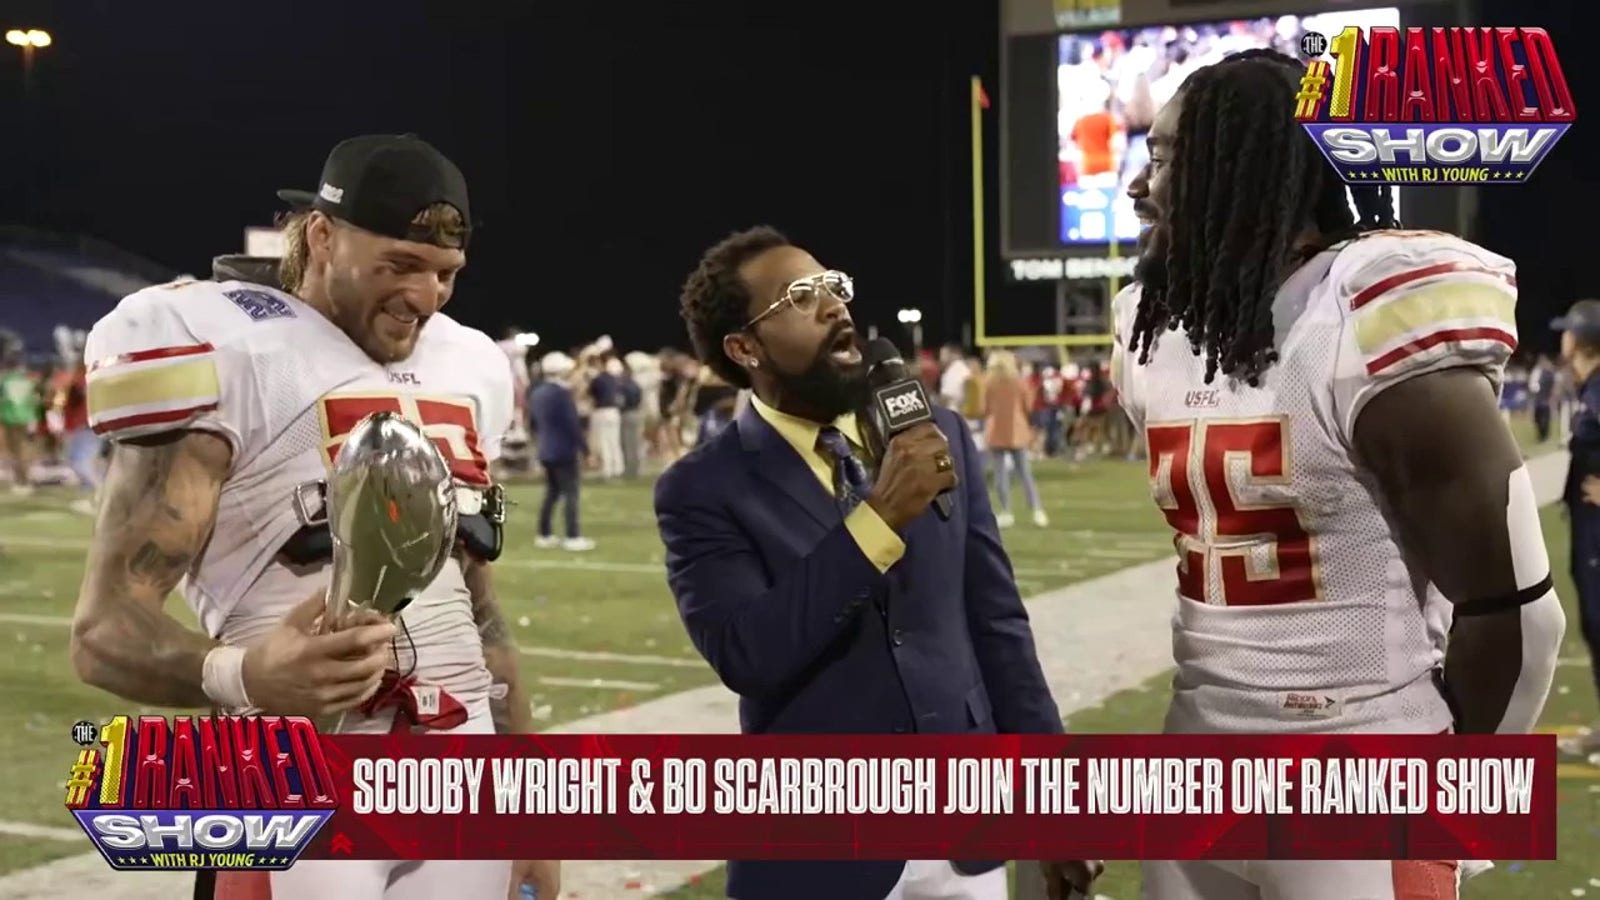 Birmingham's Scooby Wright and Bo Scarbrough reflect on title